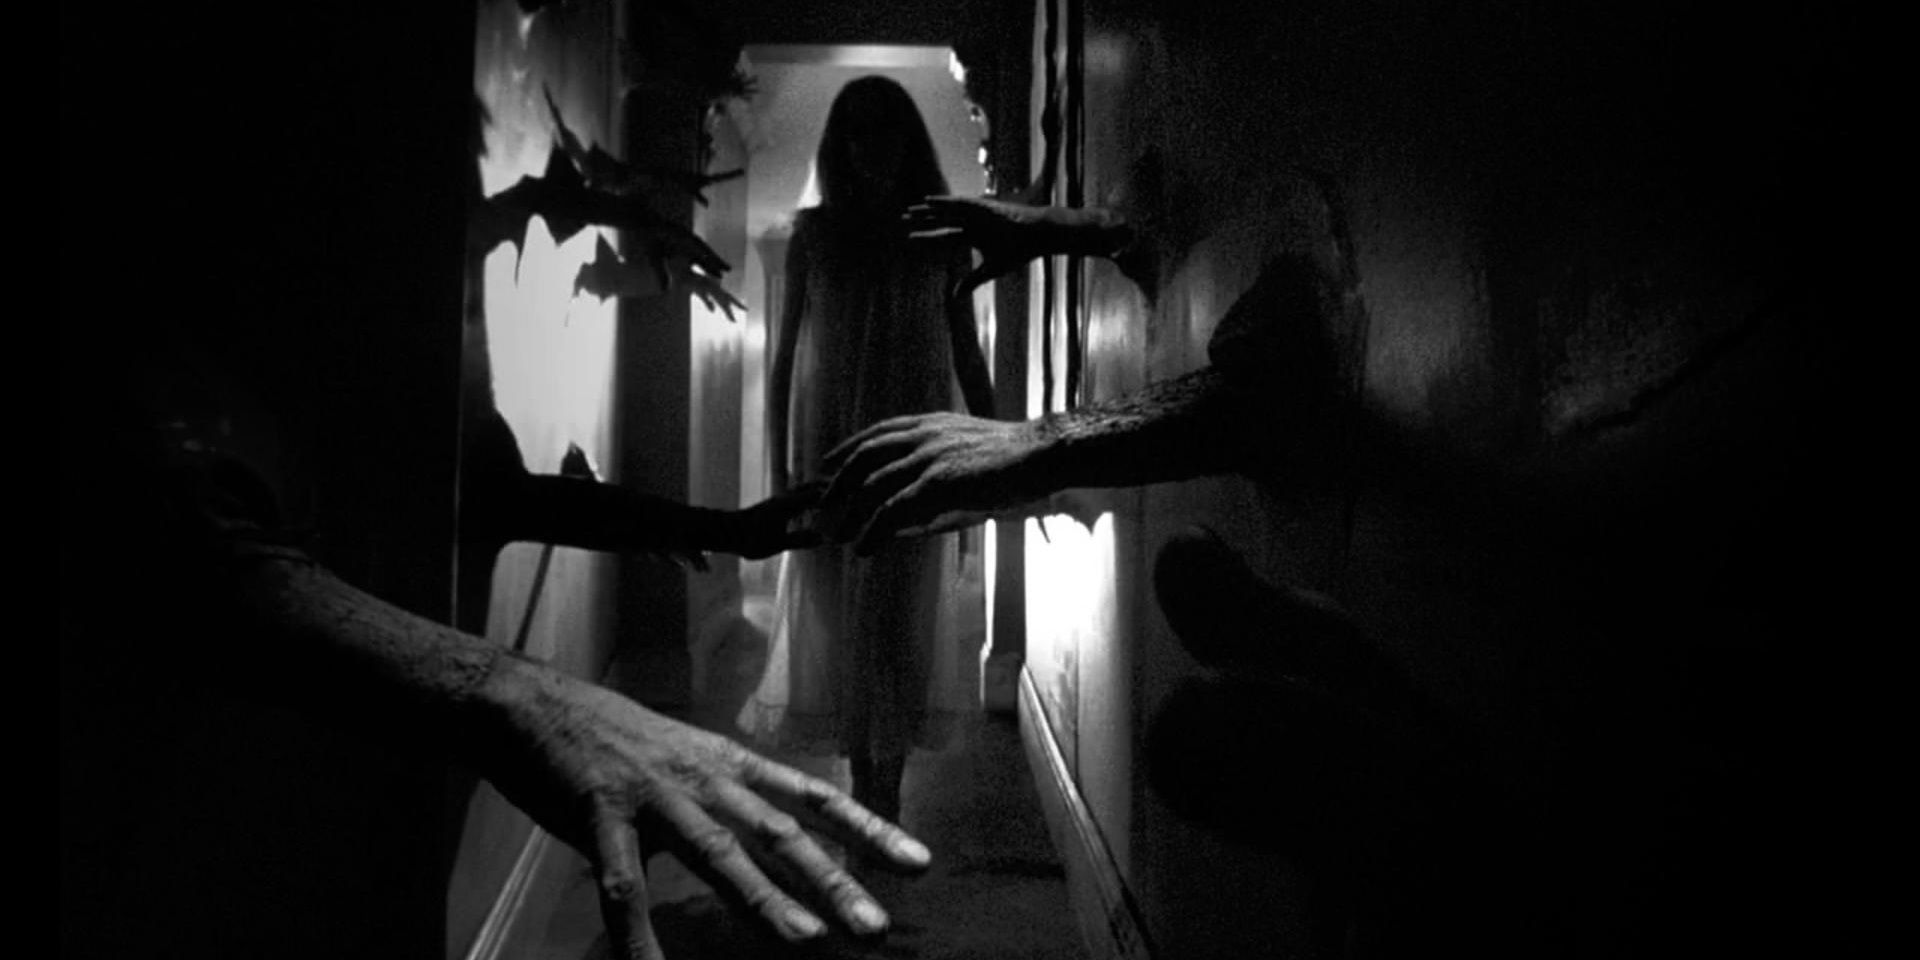 Hands coming out of the walls in Repulsion